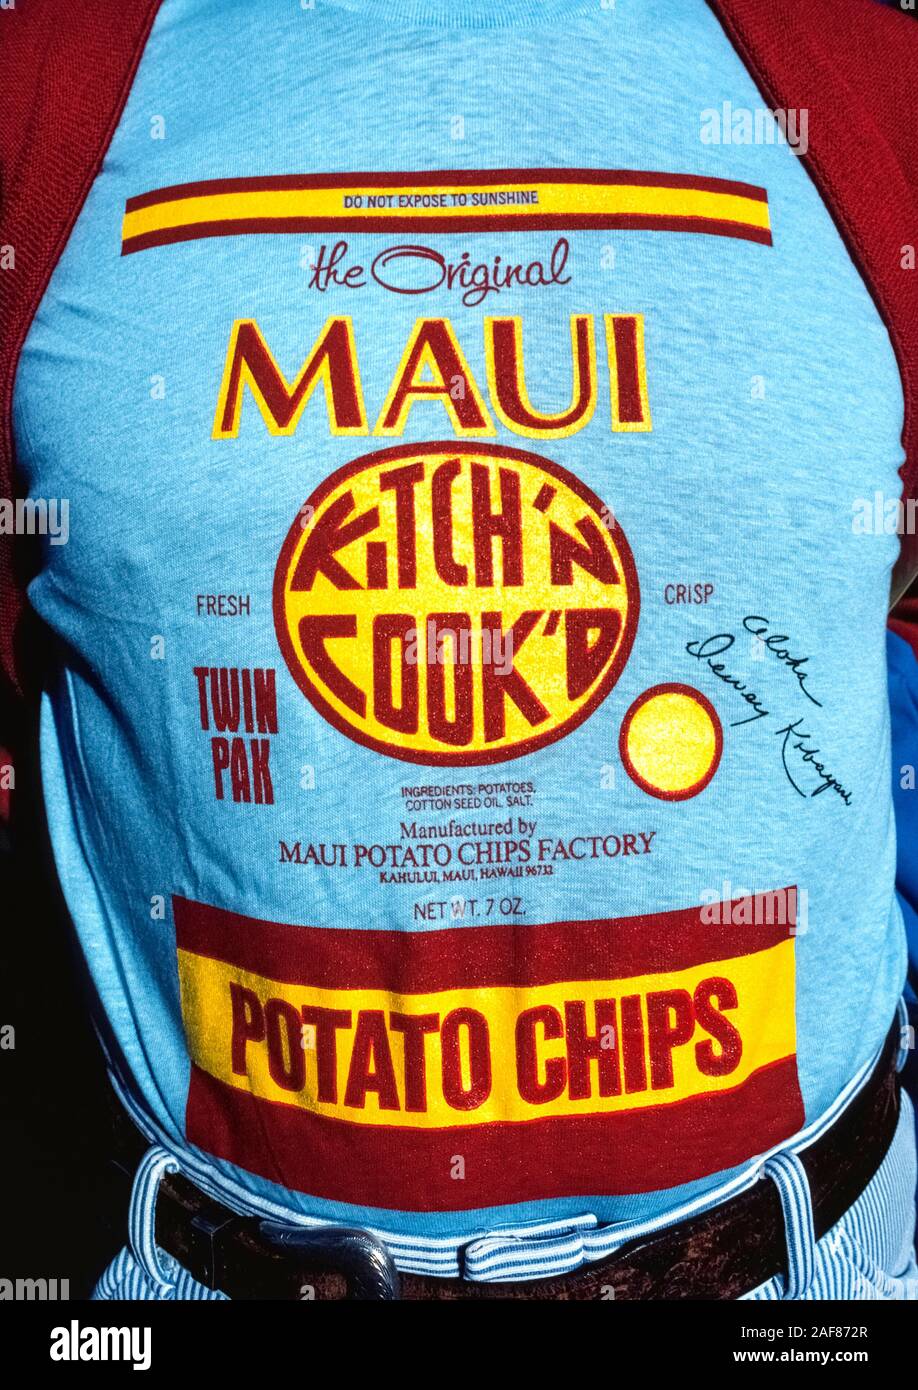 A man wears a blue shirt that replicates the front of an actual package of Maui Potato Chips, a famous snack made in Maui since 1956 that is known throughout the Hawaiian Islands, USA.  Although other makers now call their brands 'Maui' potato chips, the original product is identified by its red and yellow label and round 'Kitch'n Cook'd' logo. The 'Do Not Expose To Sunshine' warning is because the chips are packaged in clear plastic bags and the sun's UV rays and heat will cause the chips to go soft and taste stale since no chemical preservatives are used. Stock Photo